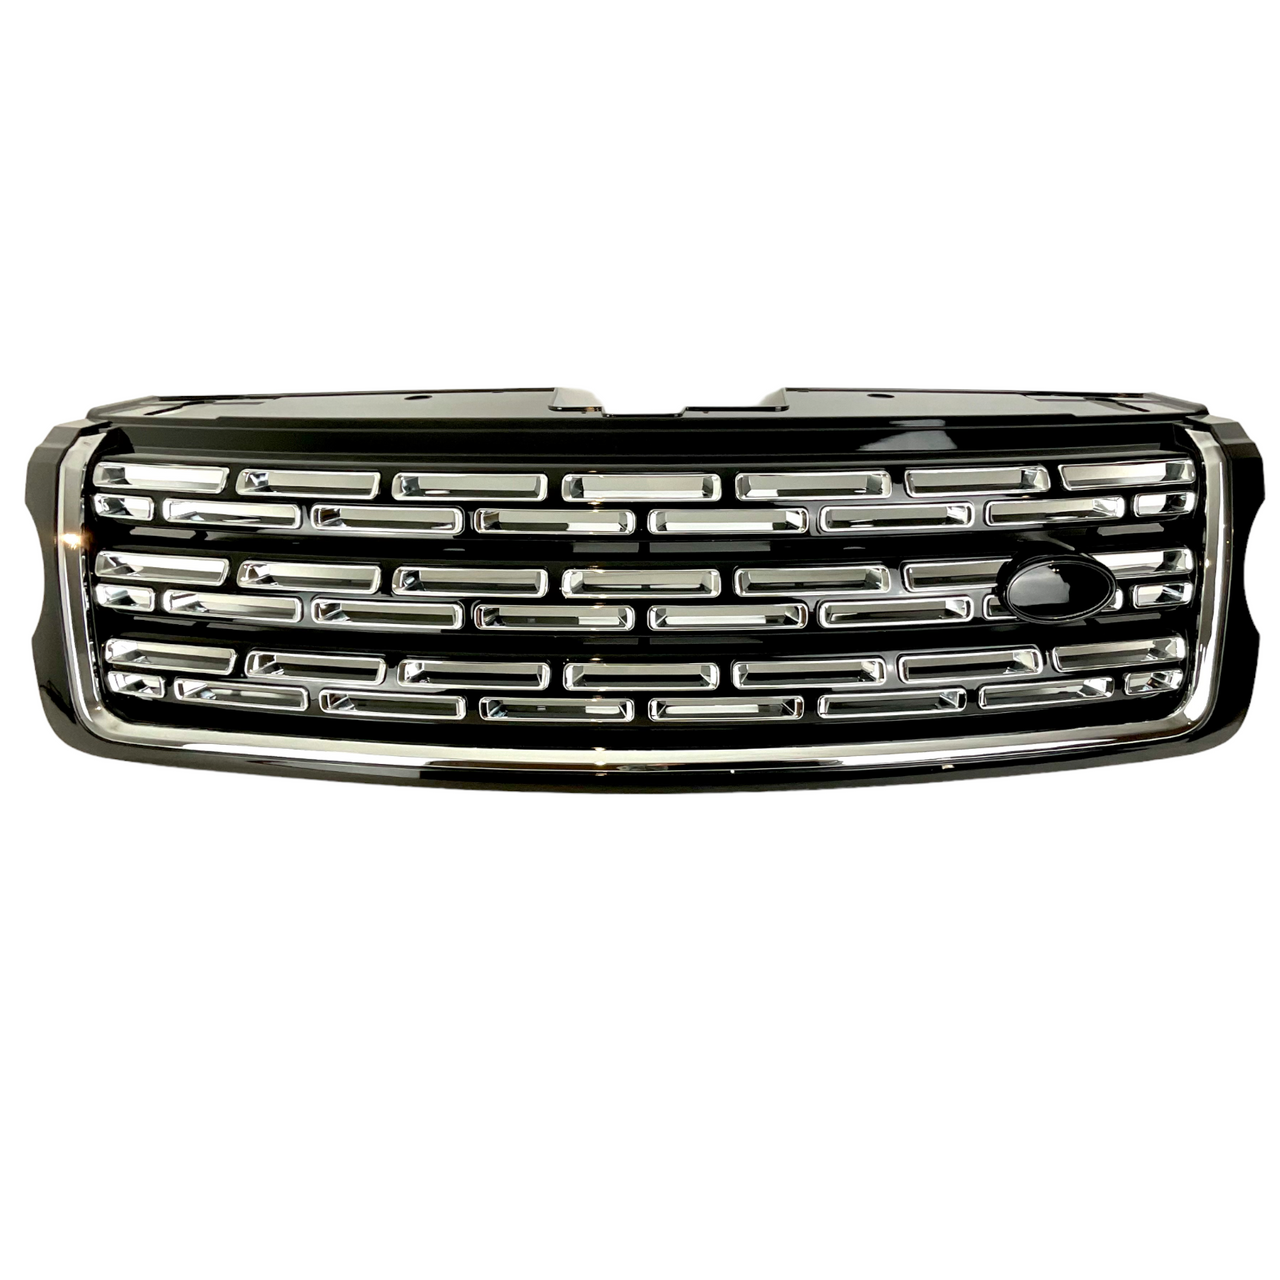 Svo Land Rover Range Rover Vogue front Mesh front Grille Grill 2014